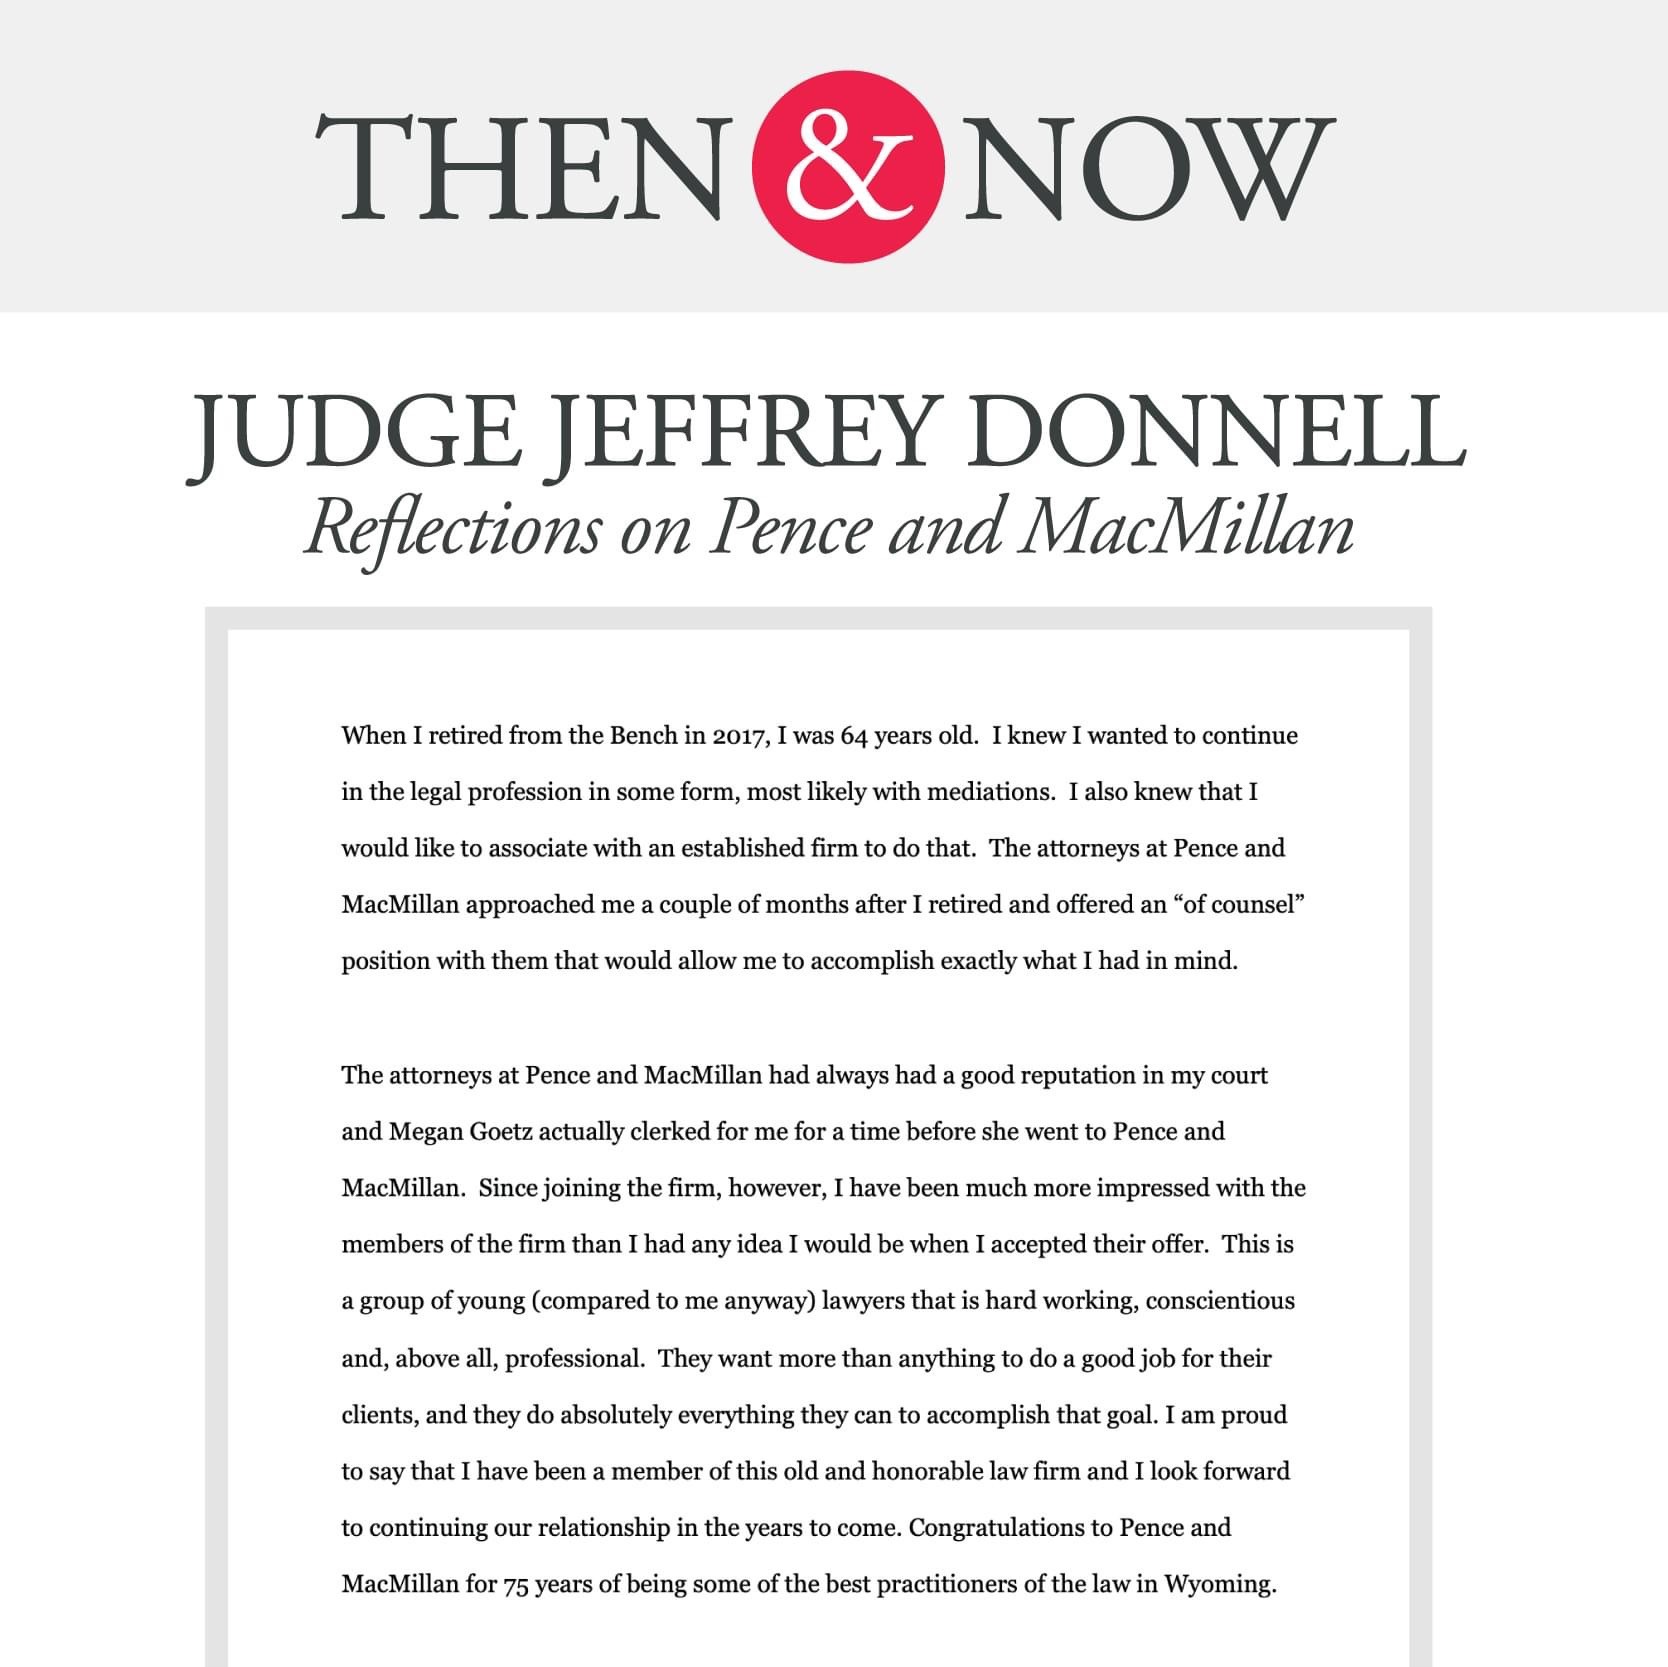 Then&Now: Judge Jeffrey Donnell Reflections on Pence and MacMillan